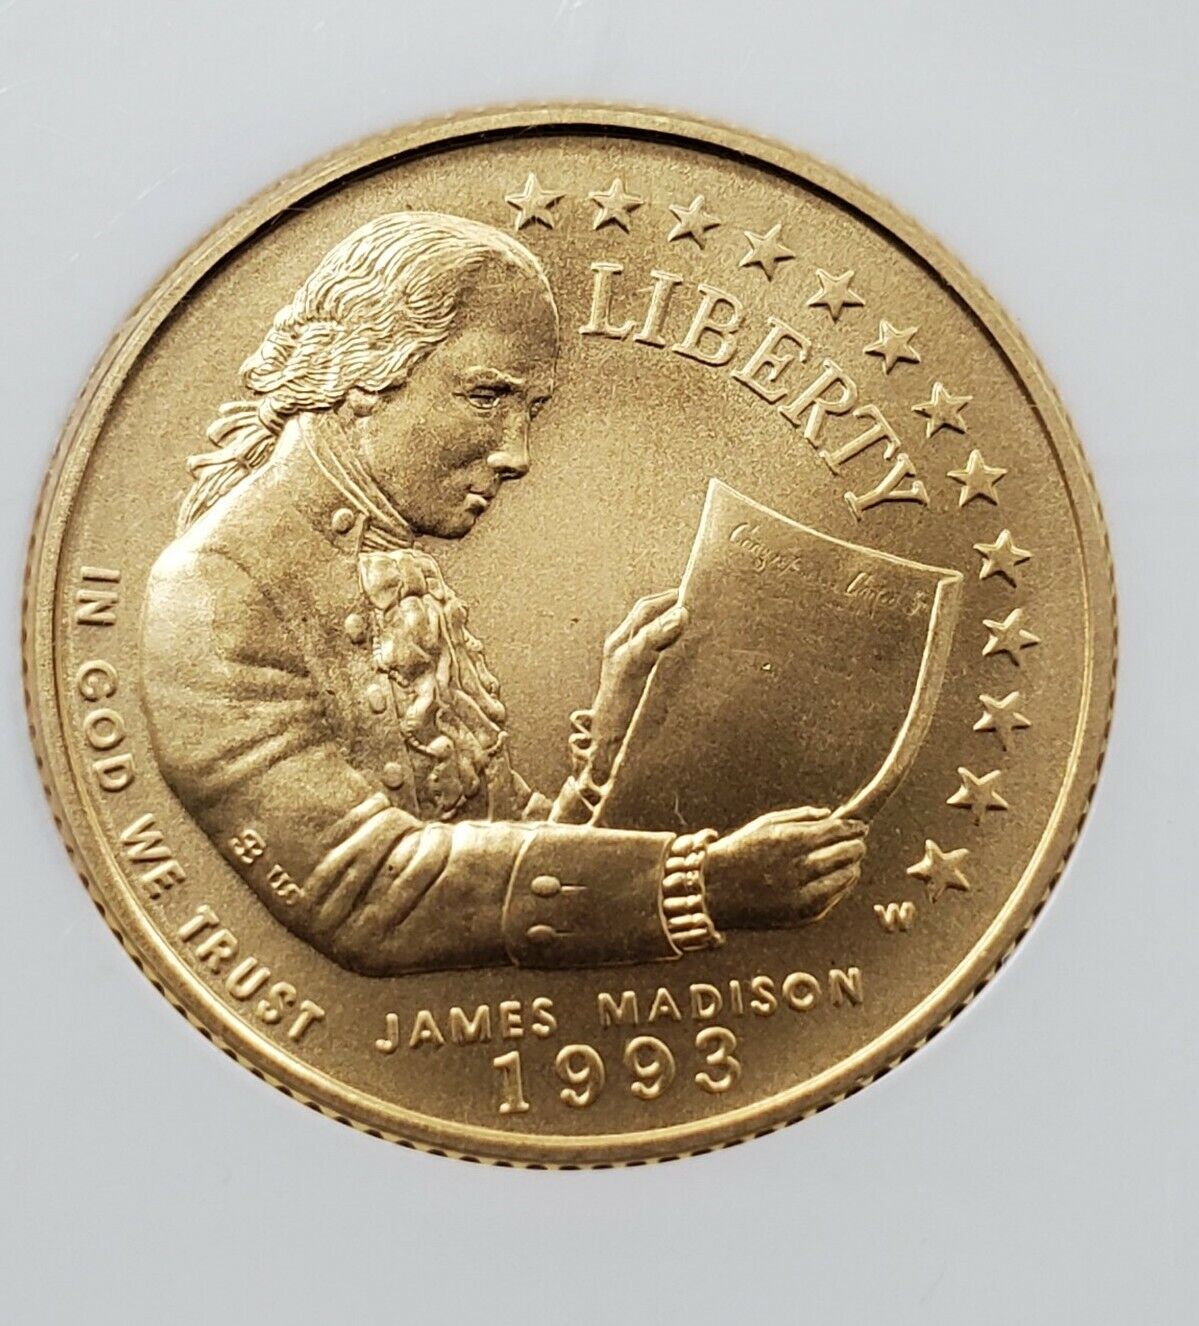 1993 W $5 NGC MS70 James Madison Mint State Gold commemorative coin